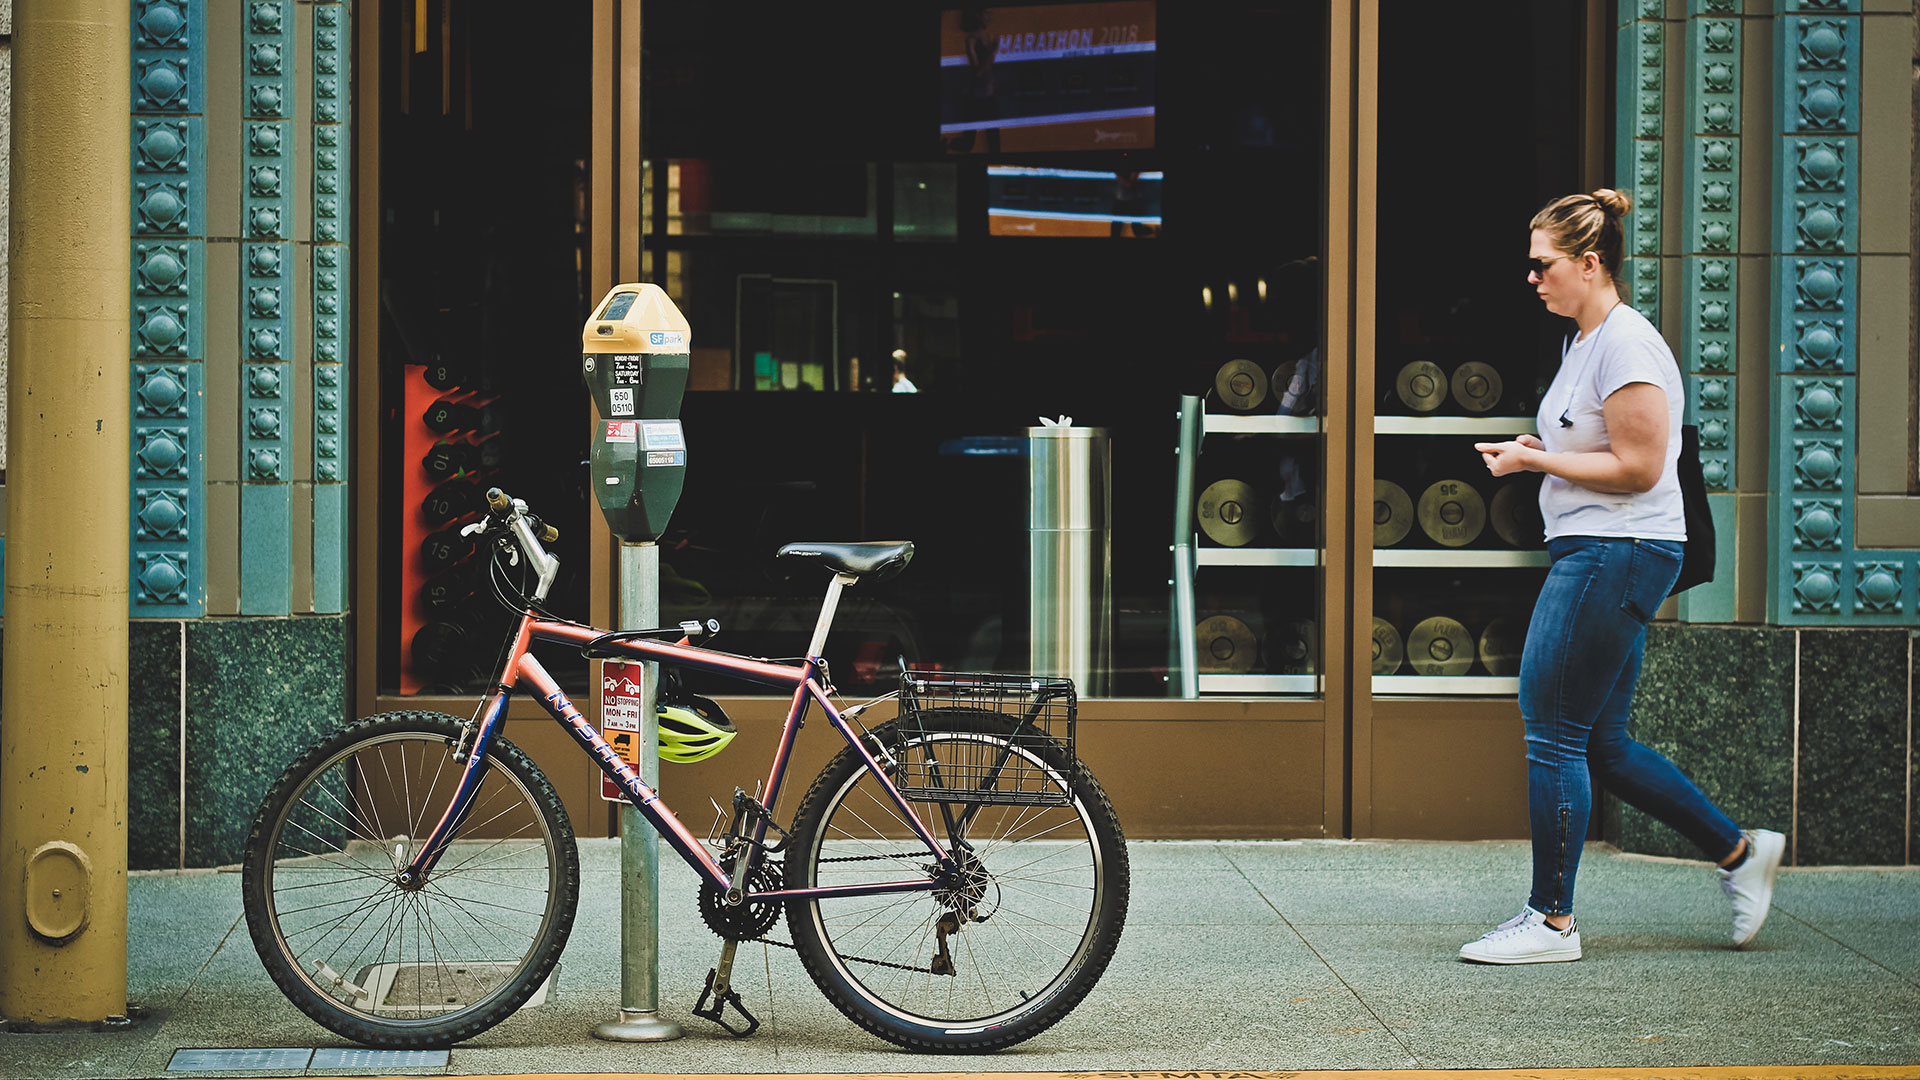 Picture of a bike on a sidewalk downtown and person walking by